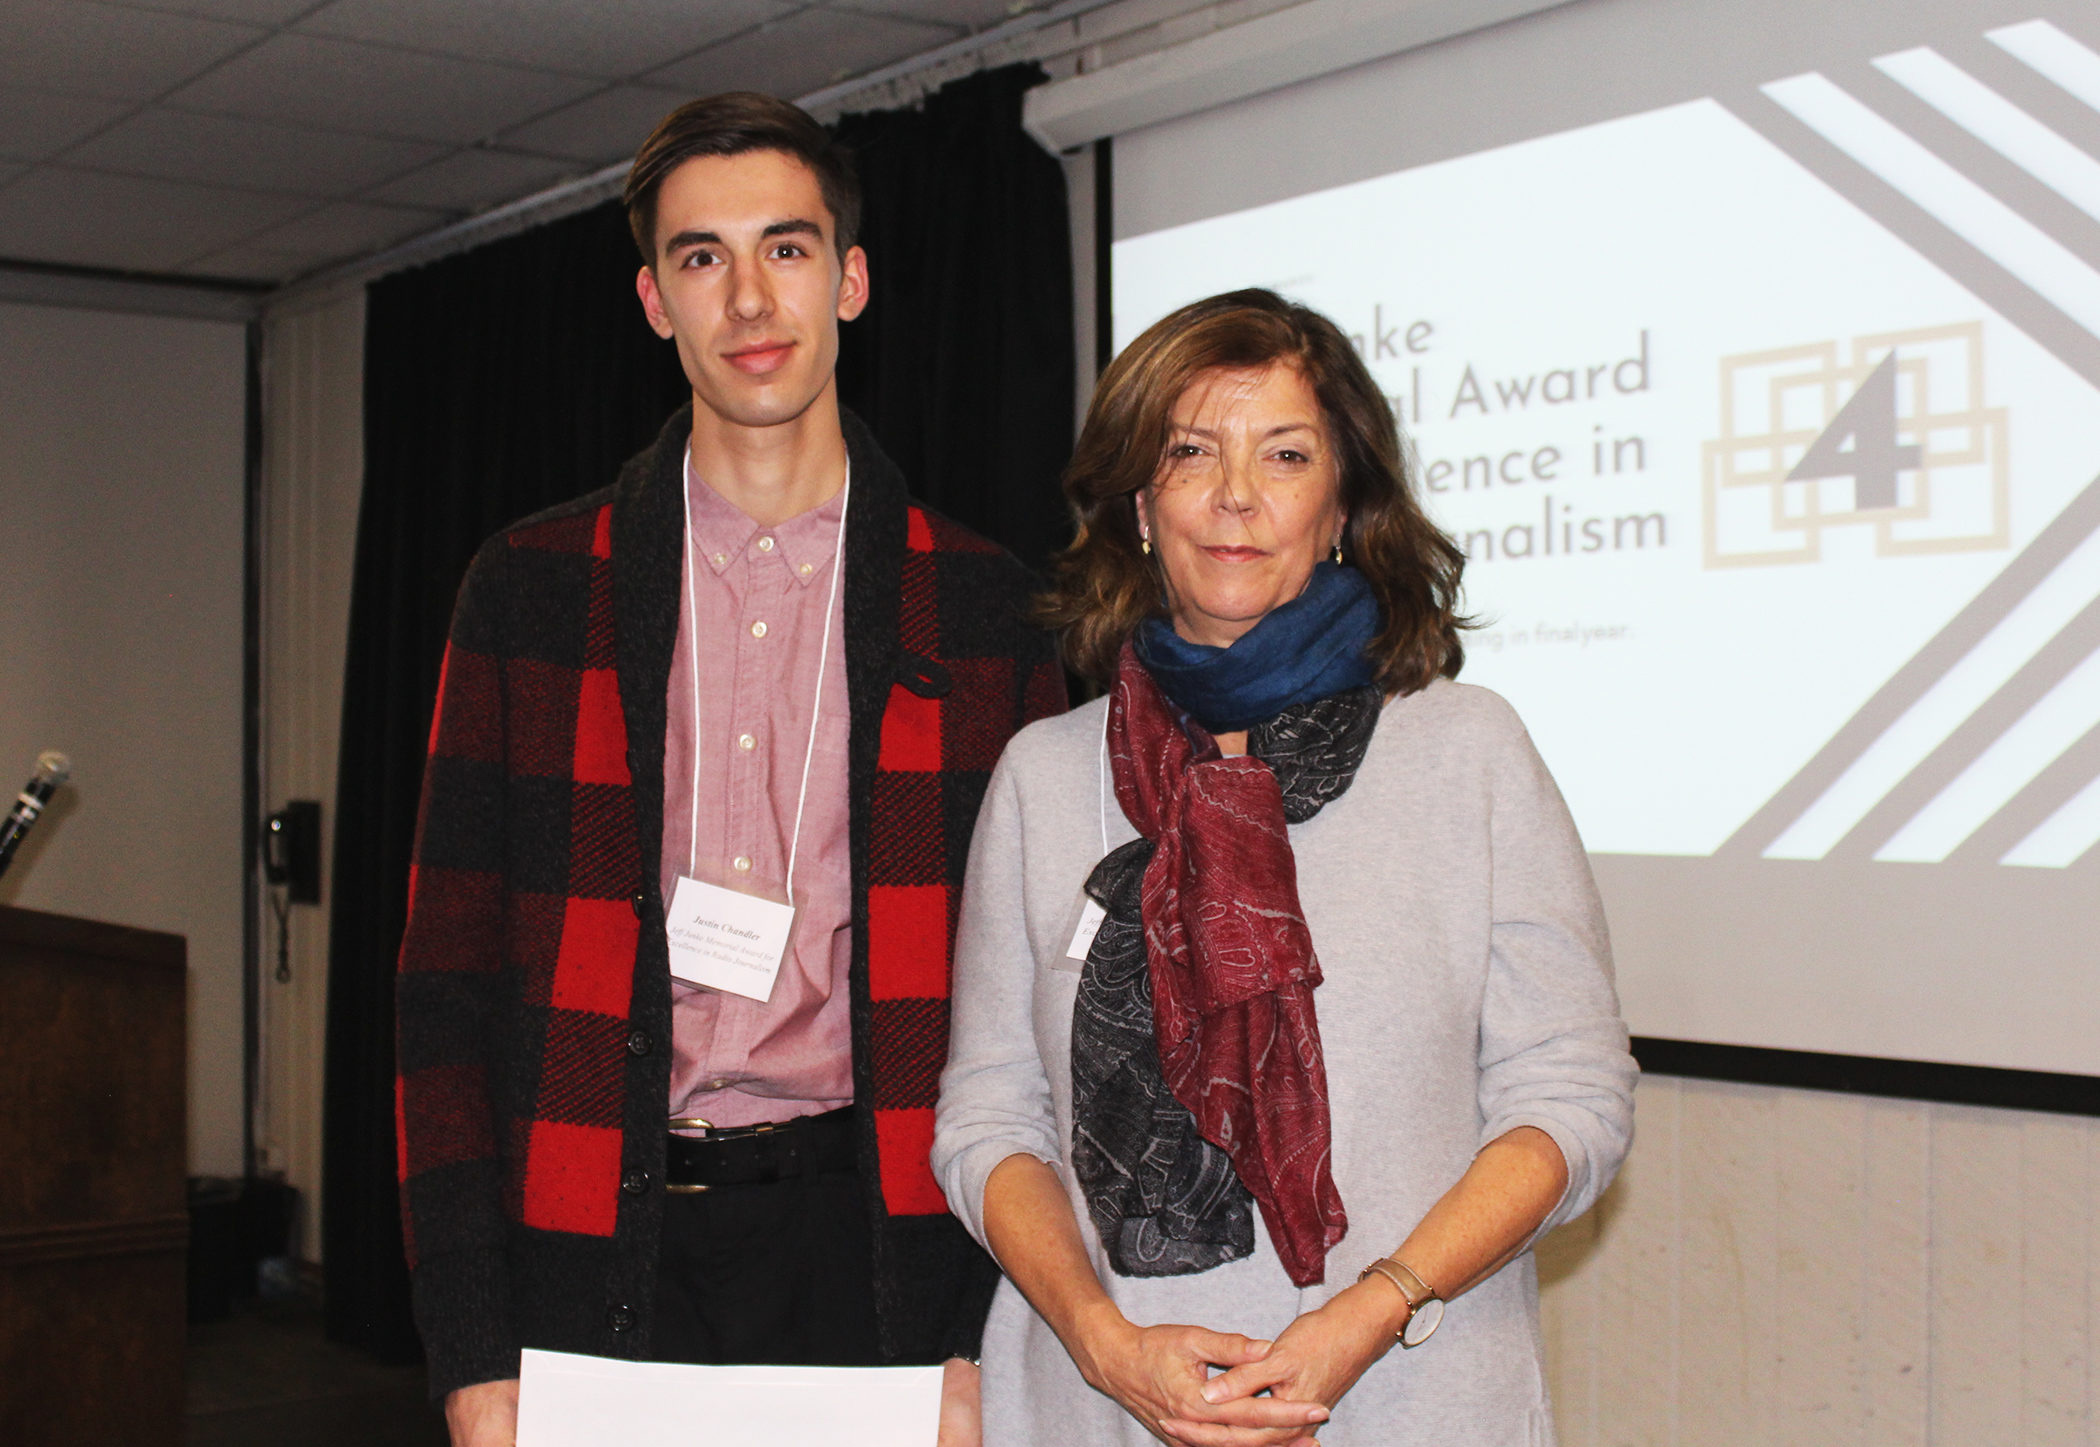 Jeff Junke Memorial Award for Excellence in Radio Journalism recipient Justin Chandler with presenter Cathy Perry.